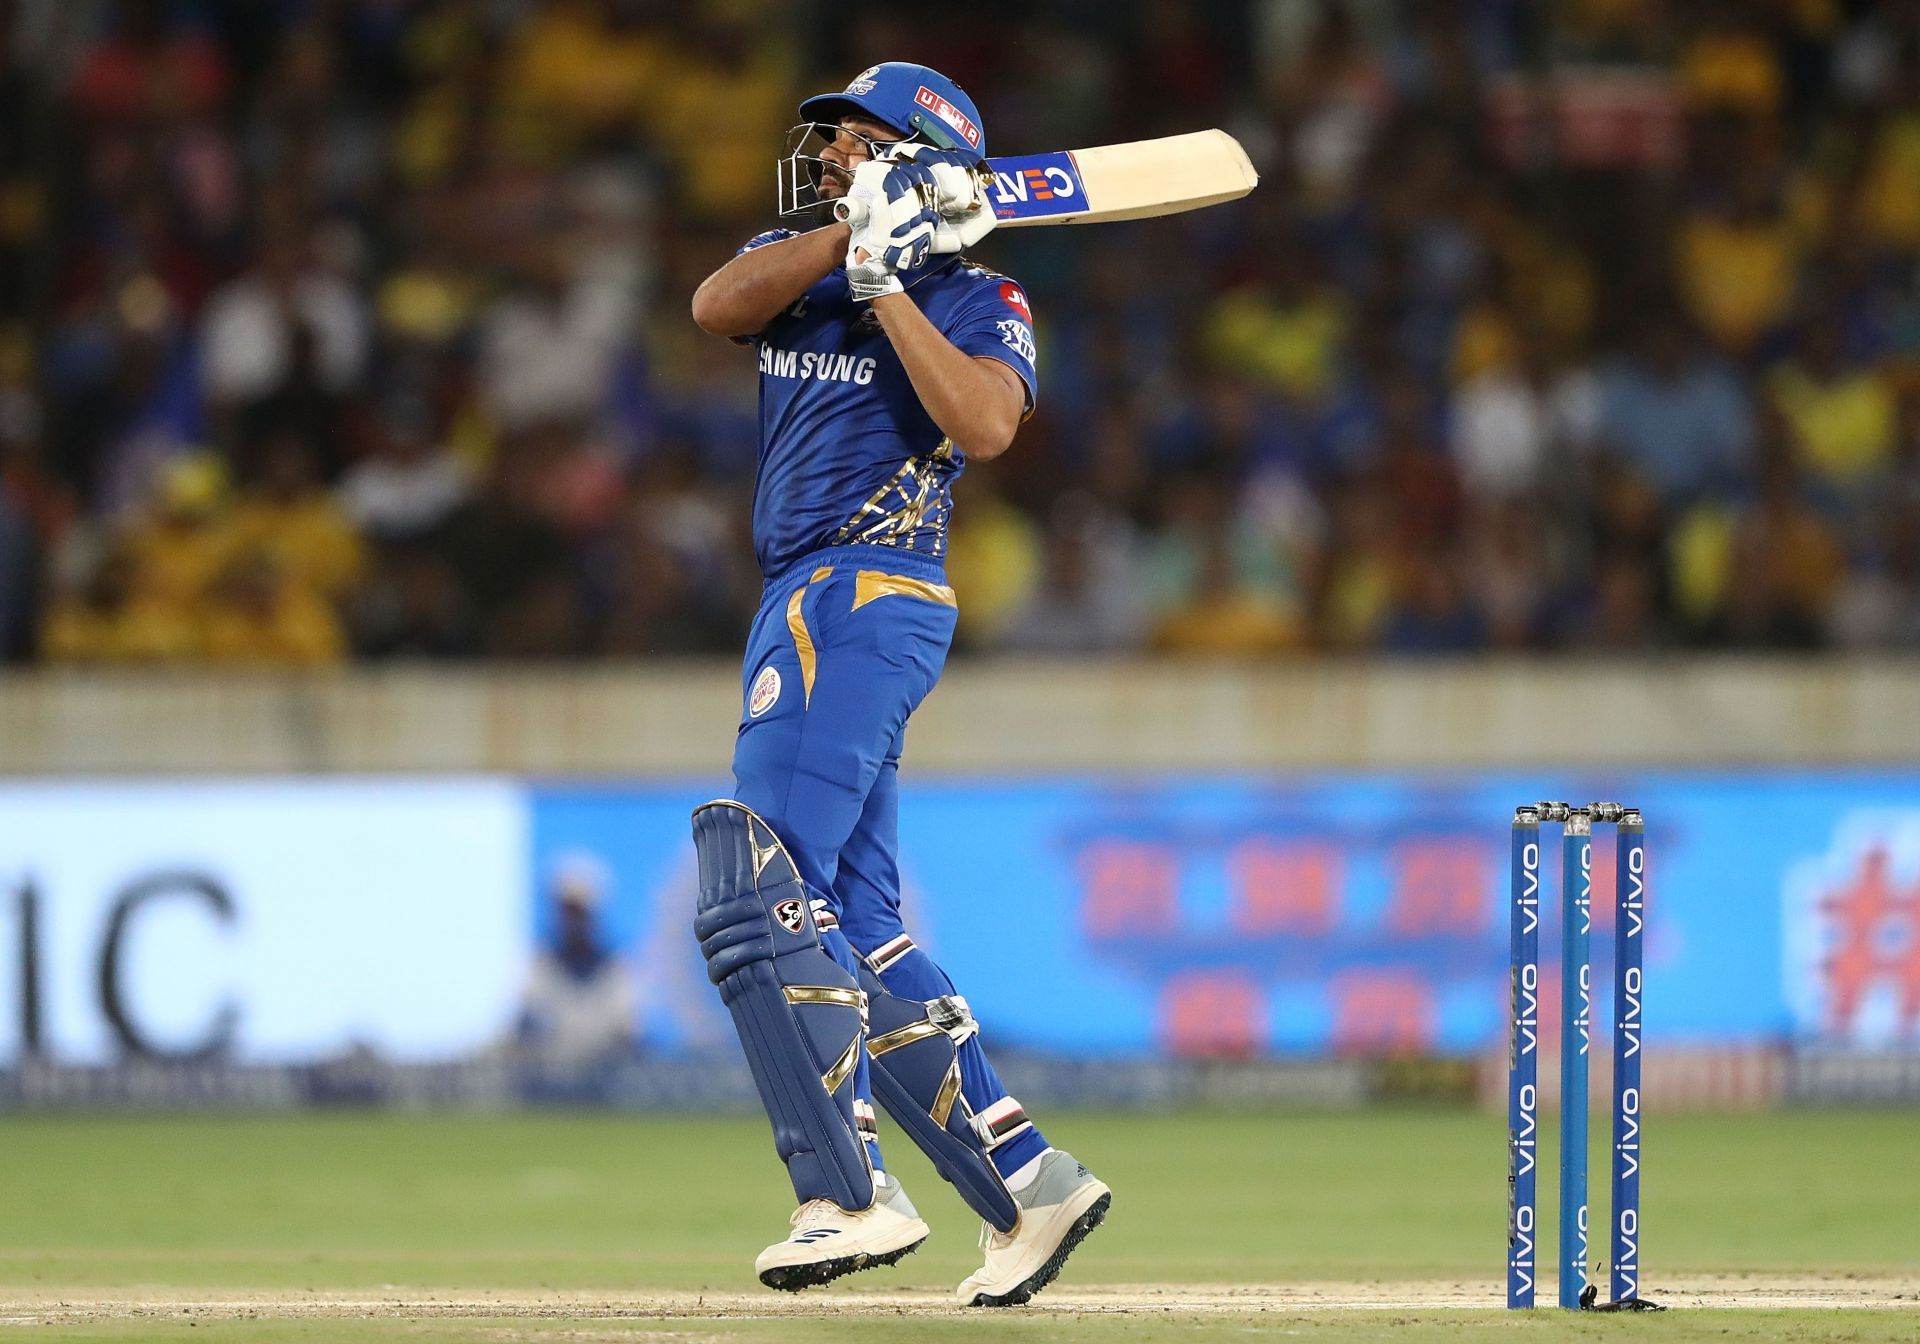 Rohit Sharma is a five-time IPL winning captain